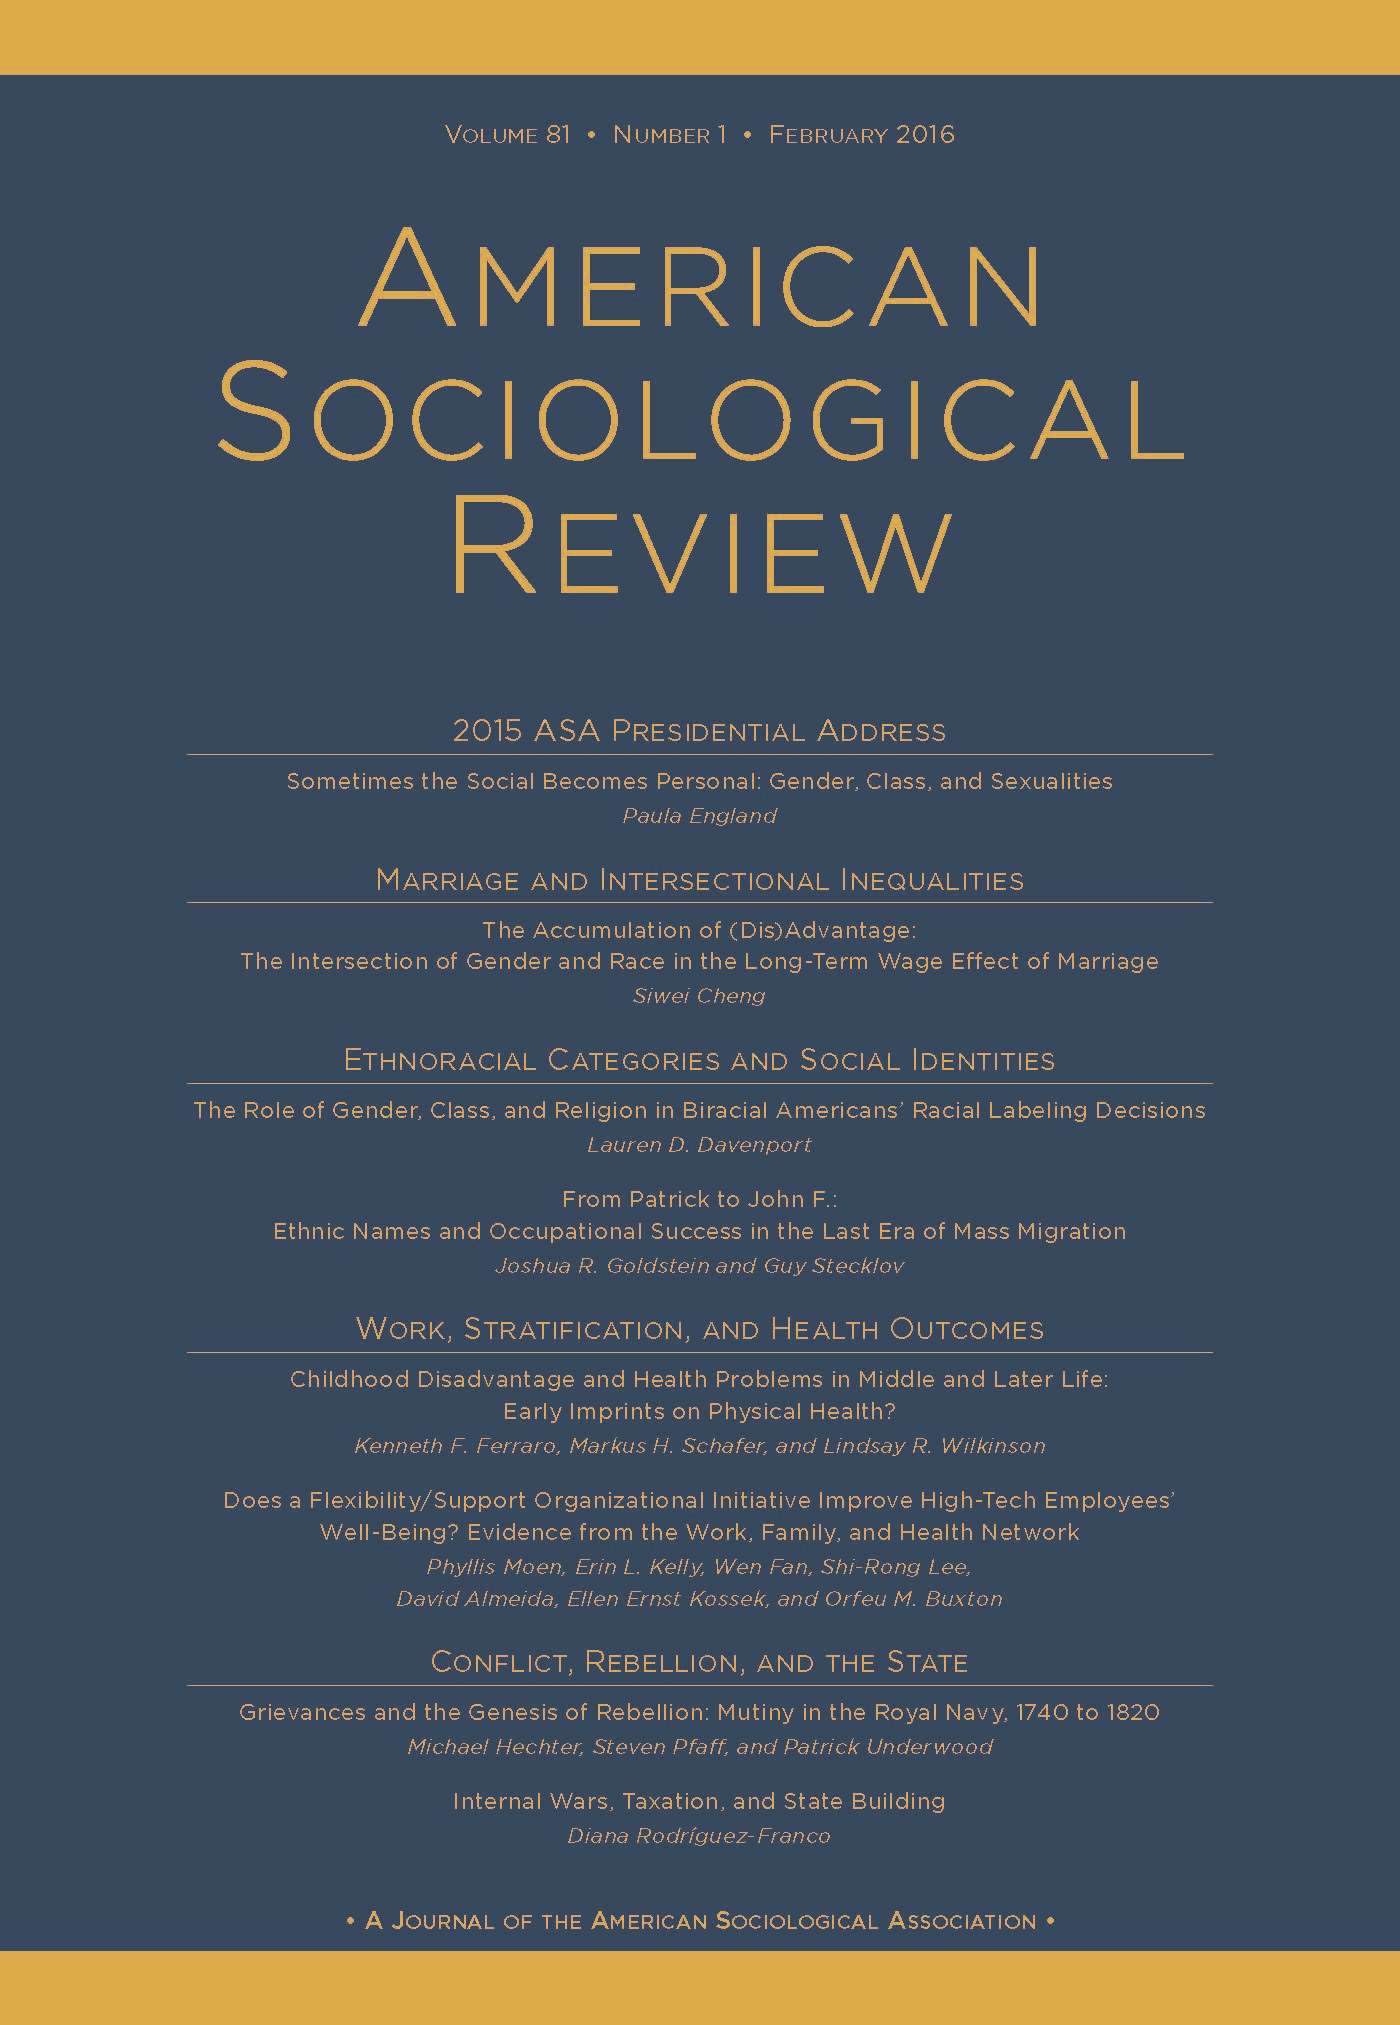  American Sociological Review cover